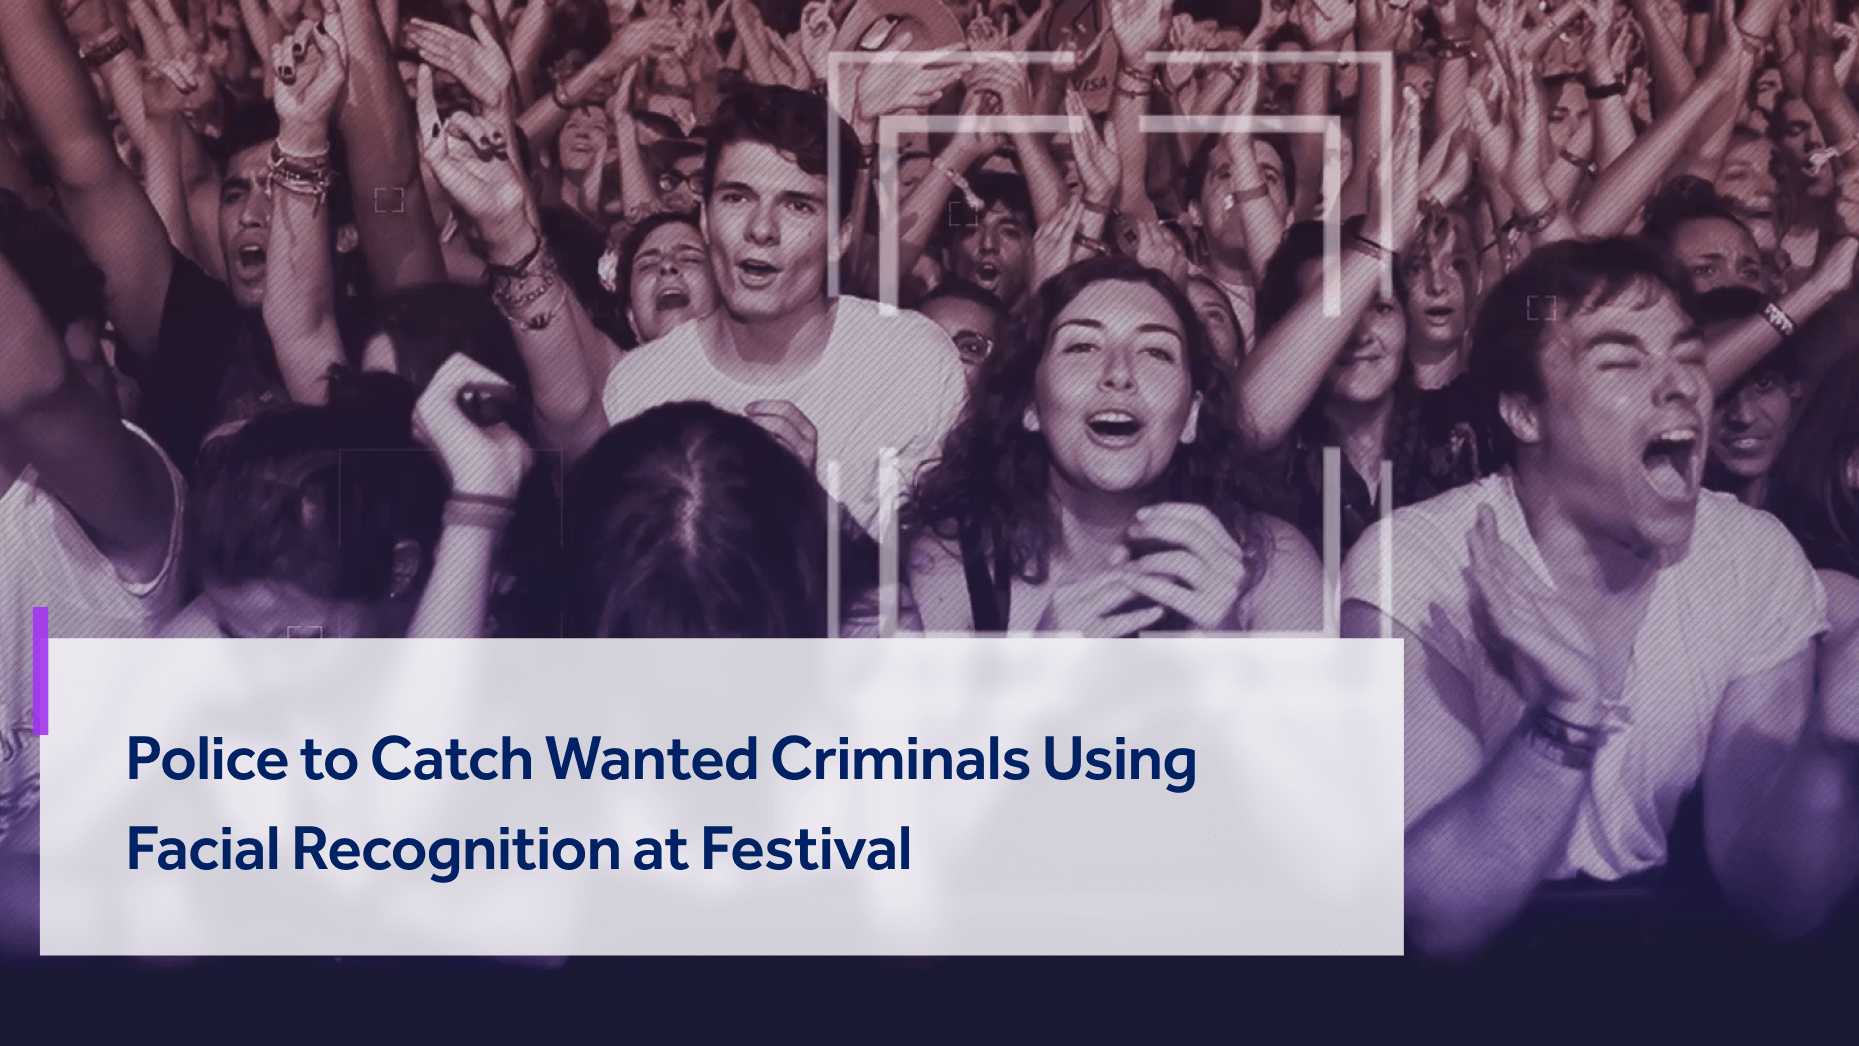 Live facial recognition implemented at a festival will match faces against a database to check if they are a wanted criminal.